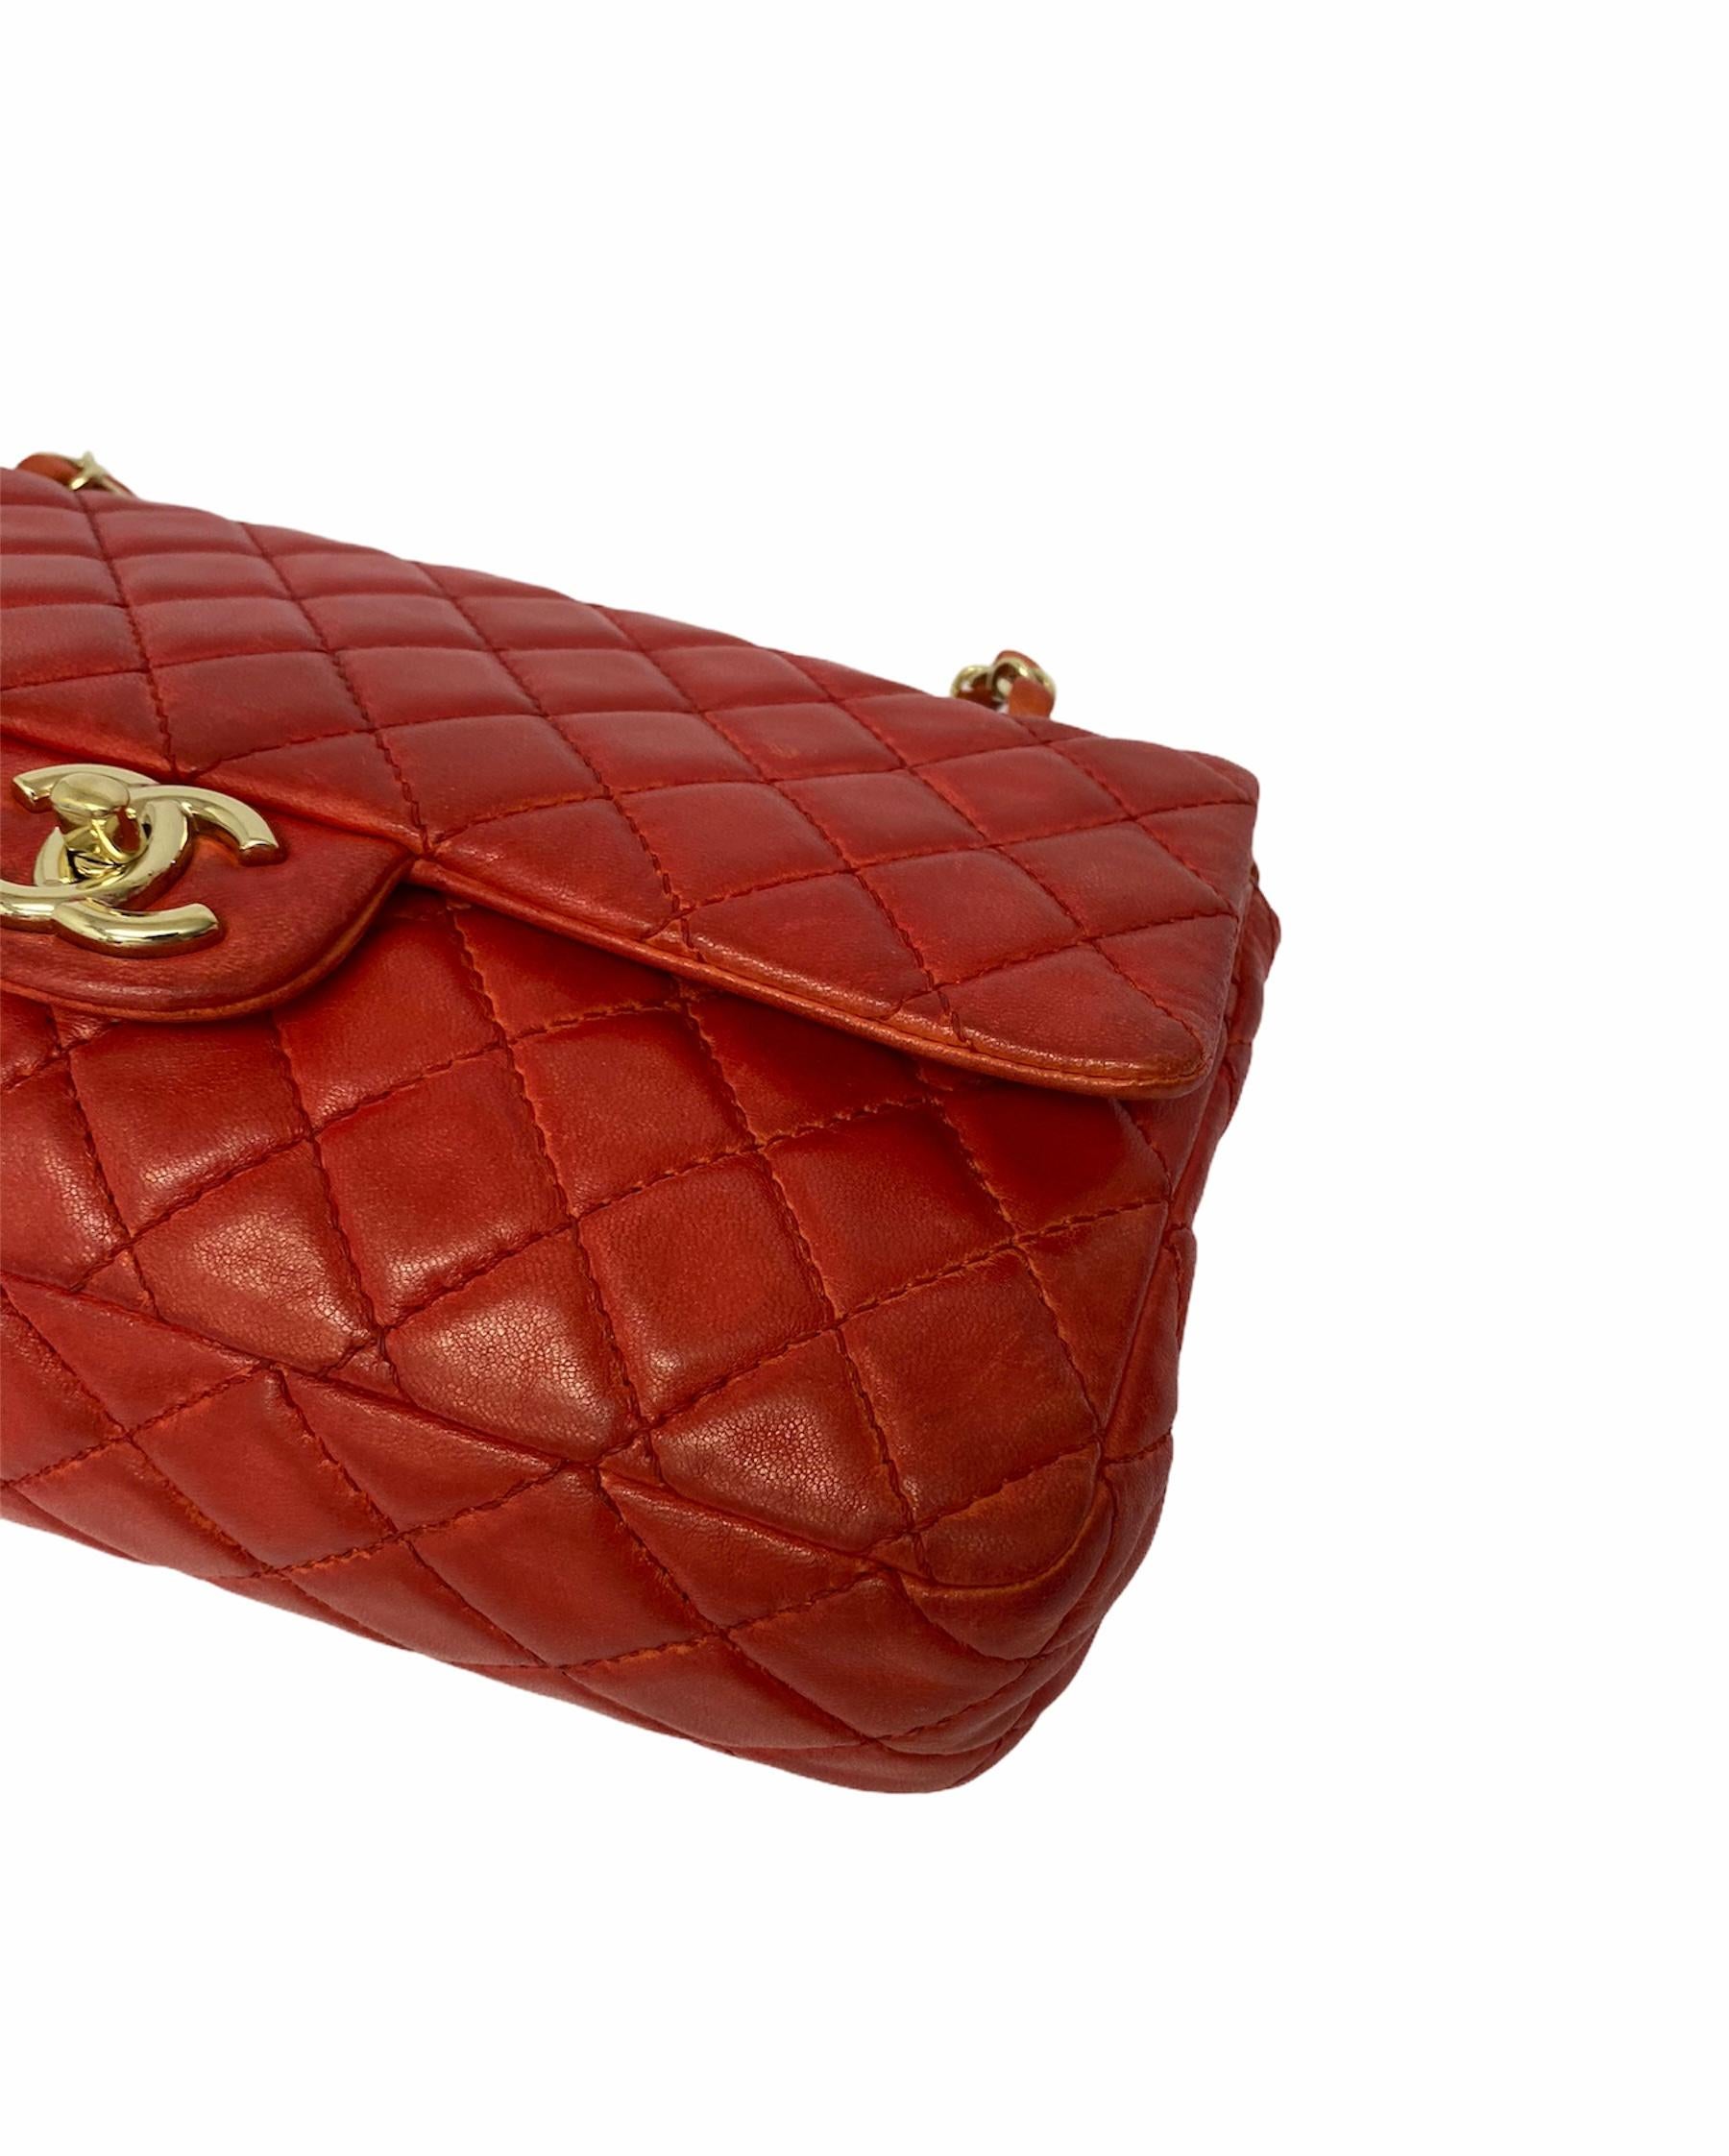 Chanel 2.55 Red Leather with Golden Hardware 2